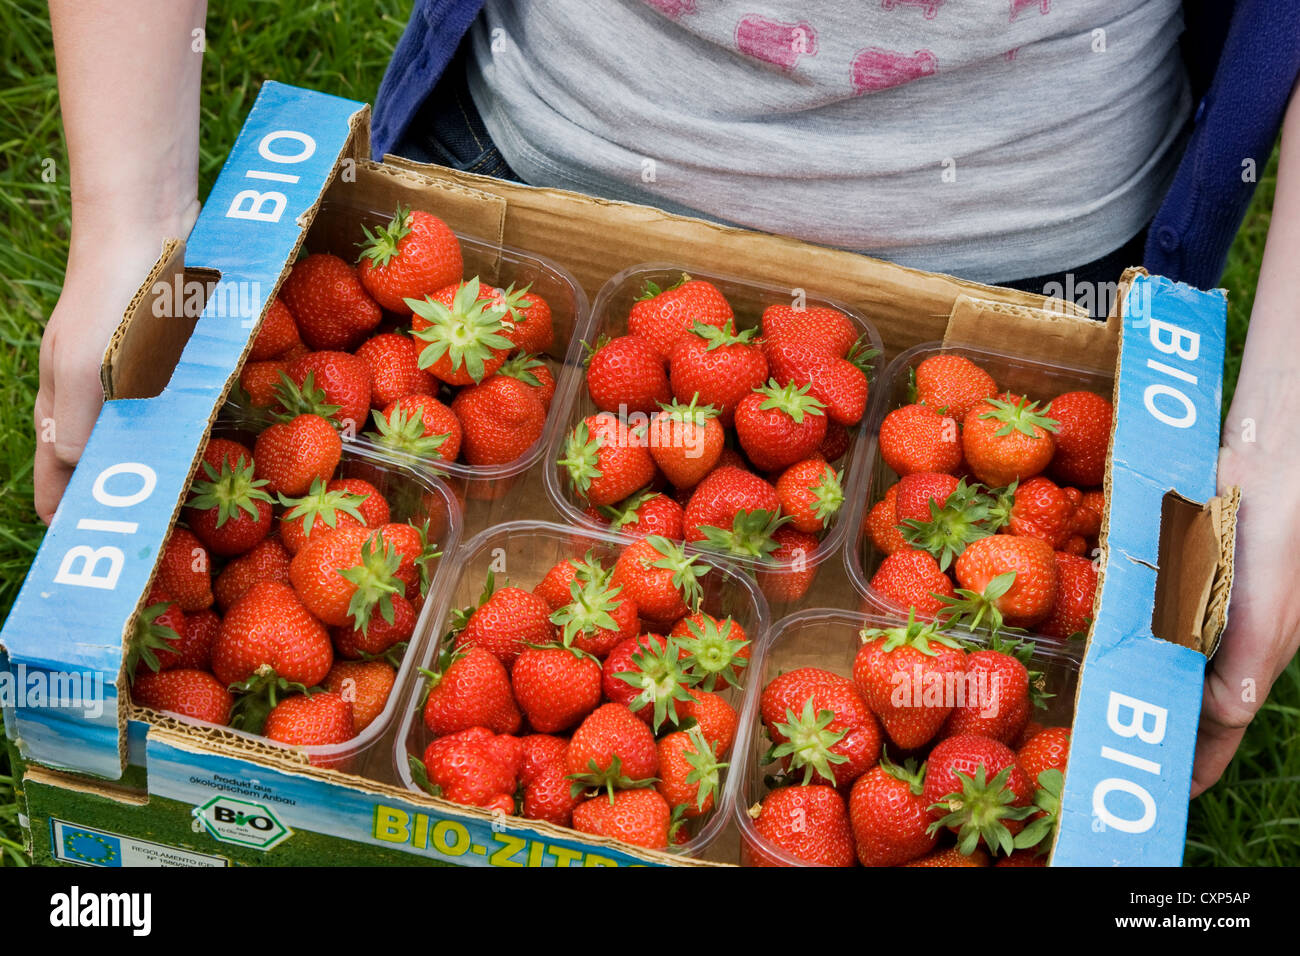 Close up of horticulturist holding carton with plastic boxes with cultivated strawberries (Fragaria), Belgium Stock Photo